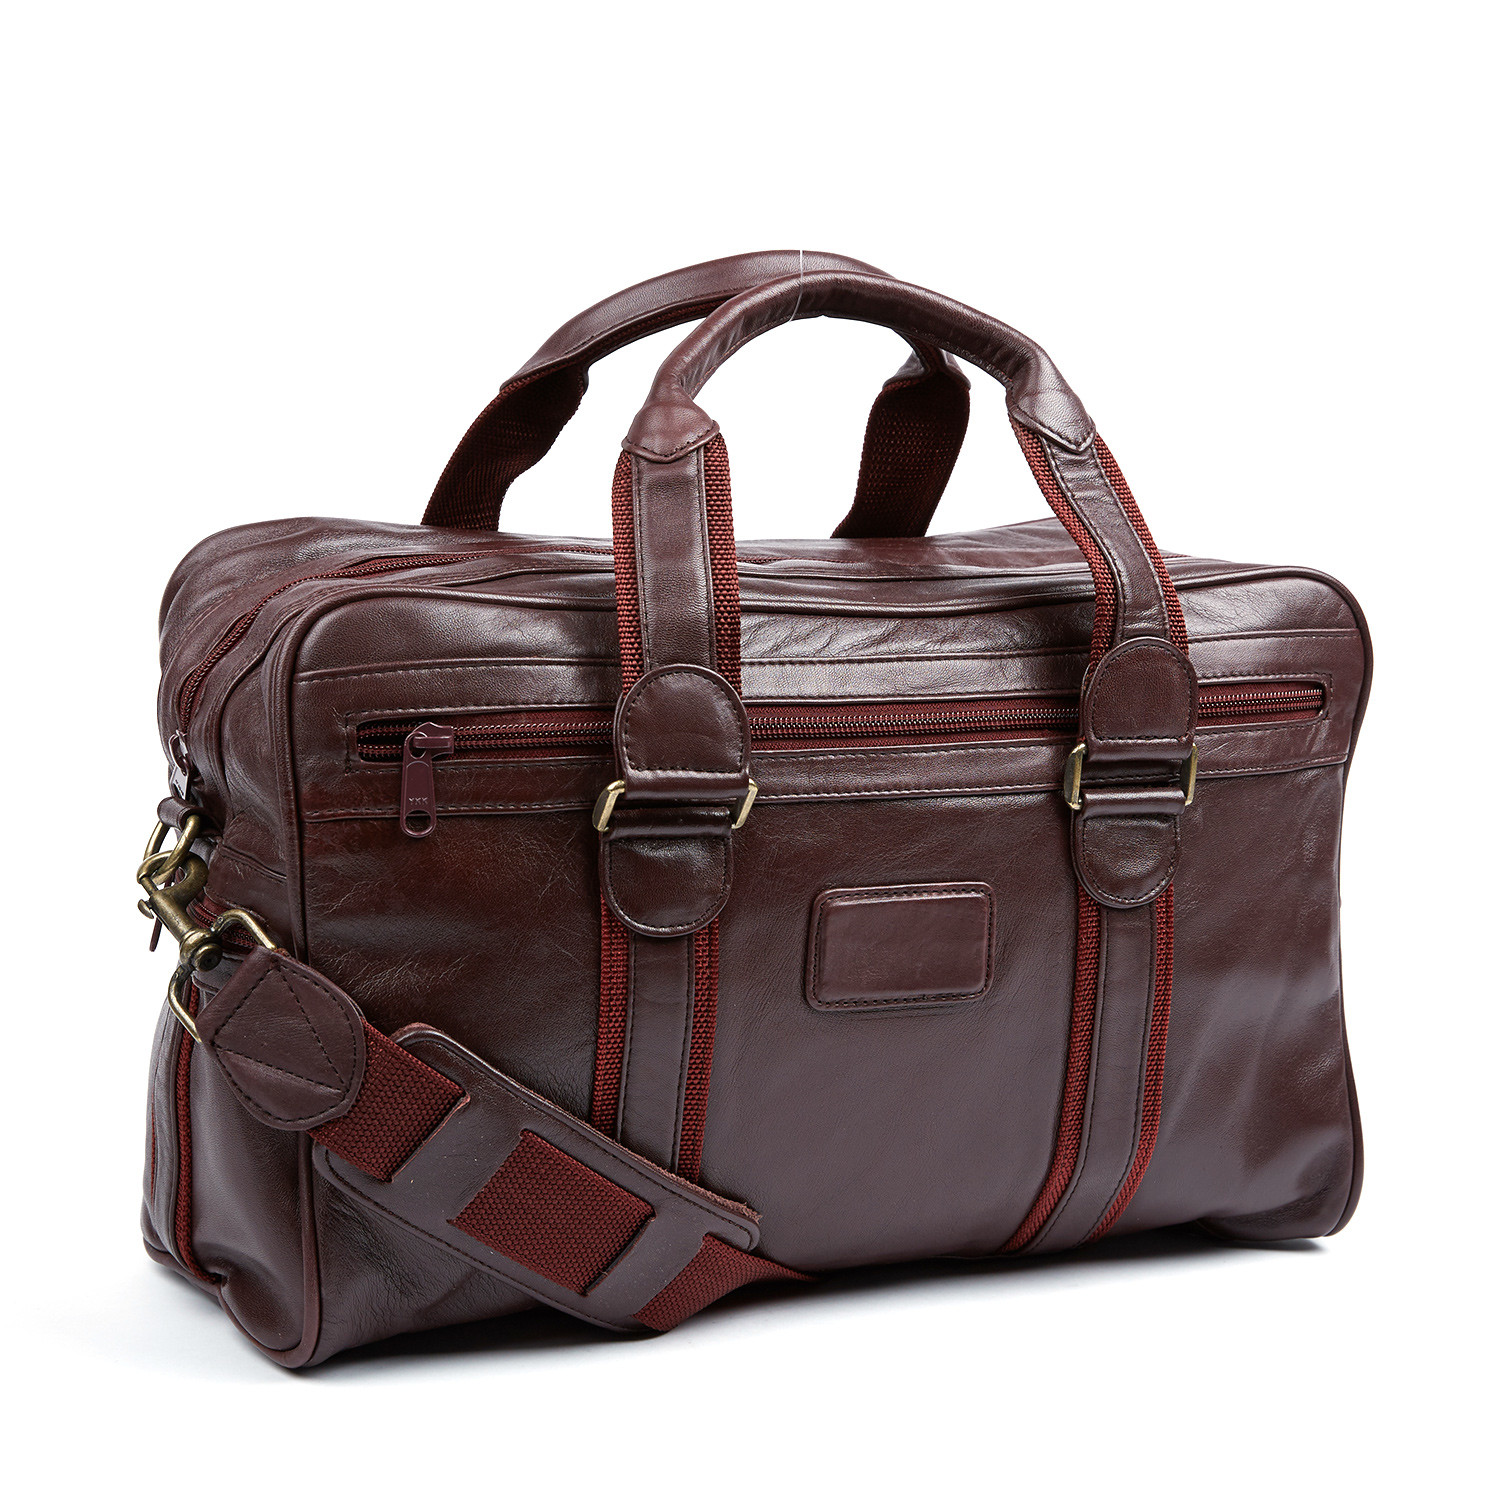 Leather Duffle Travel Bag // Burgundy - Tanners Avenue - Touch of Modern